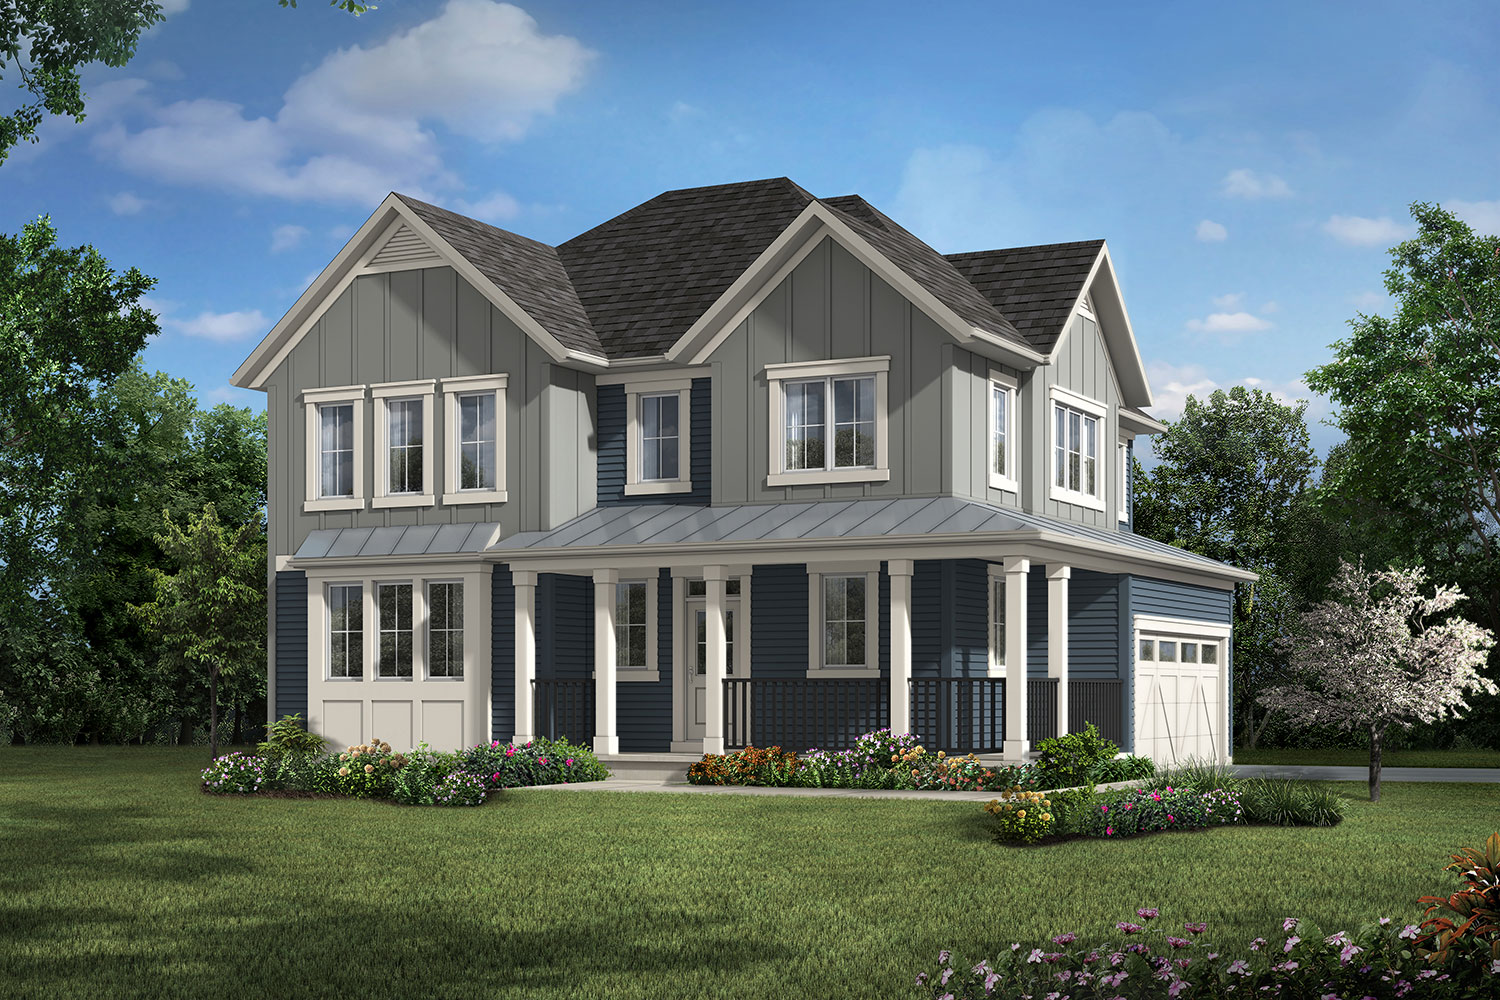 Mattamy’s Carrington home designs include single-family homes, urban towhomes, duplexes and other innovations like the recently released WideLot design, which allows for a wider frontage with a shorter lot depth.
Courtesy Mattamy Homes